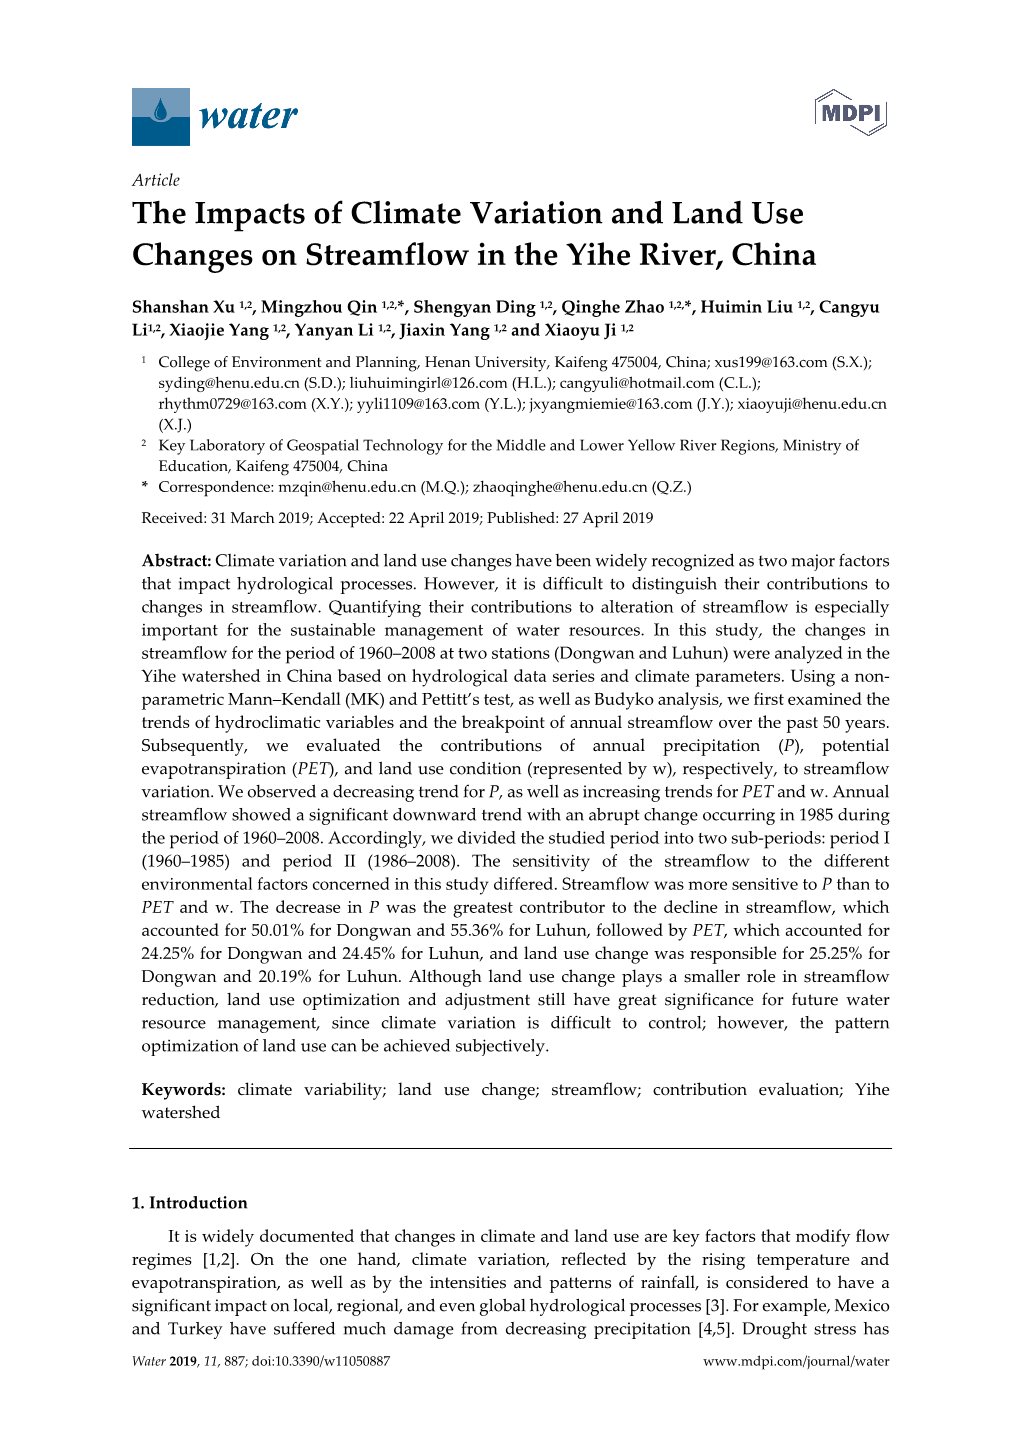 The Impacts of Climate Variation and Land Use Changes on Streamflow in the Yihe River, China